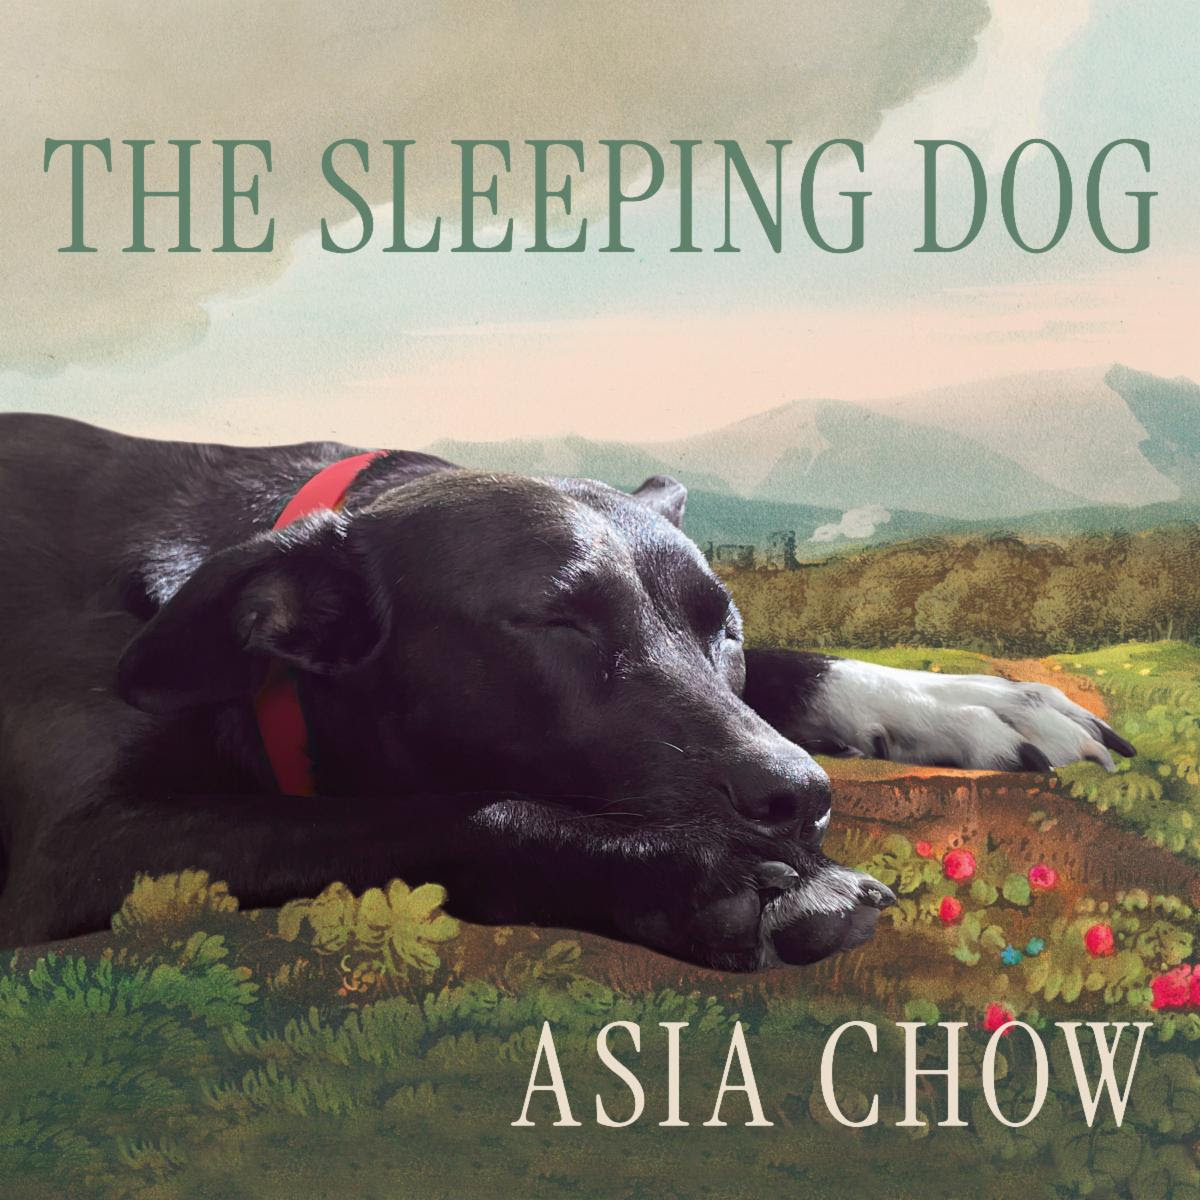 Asia Chow Releases New Single, “The Sleeping Dog”